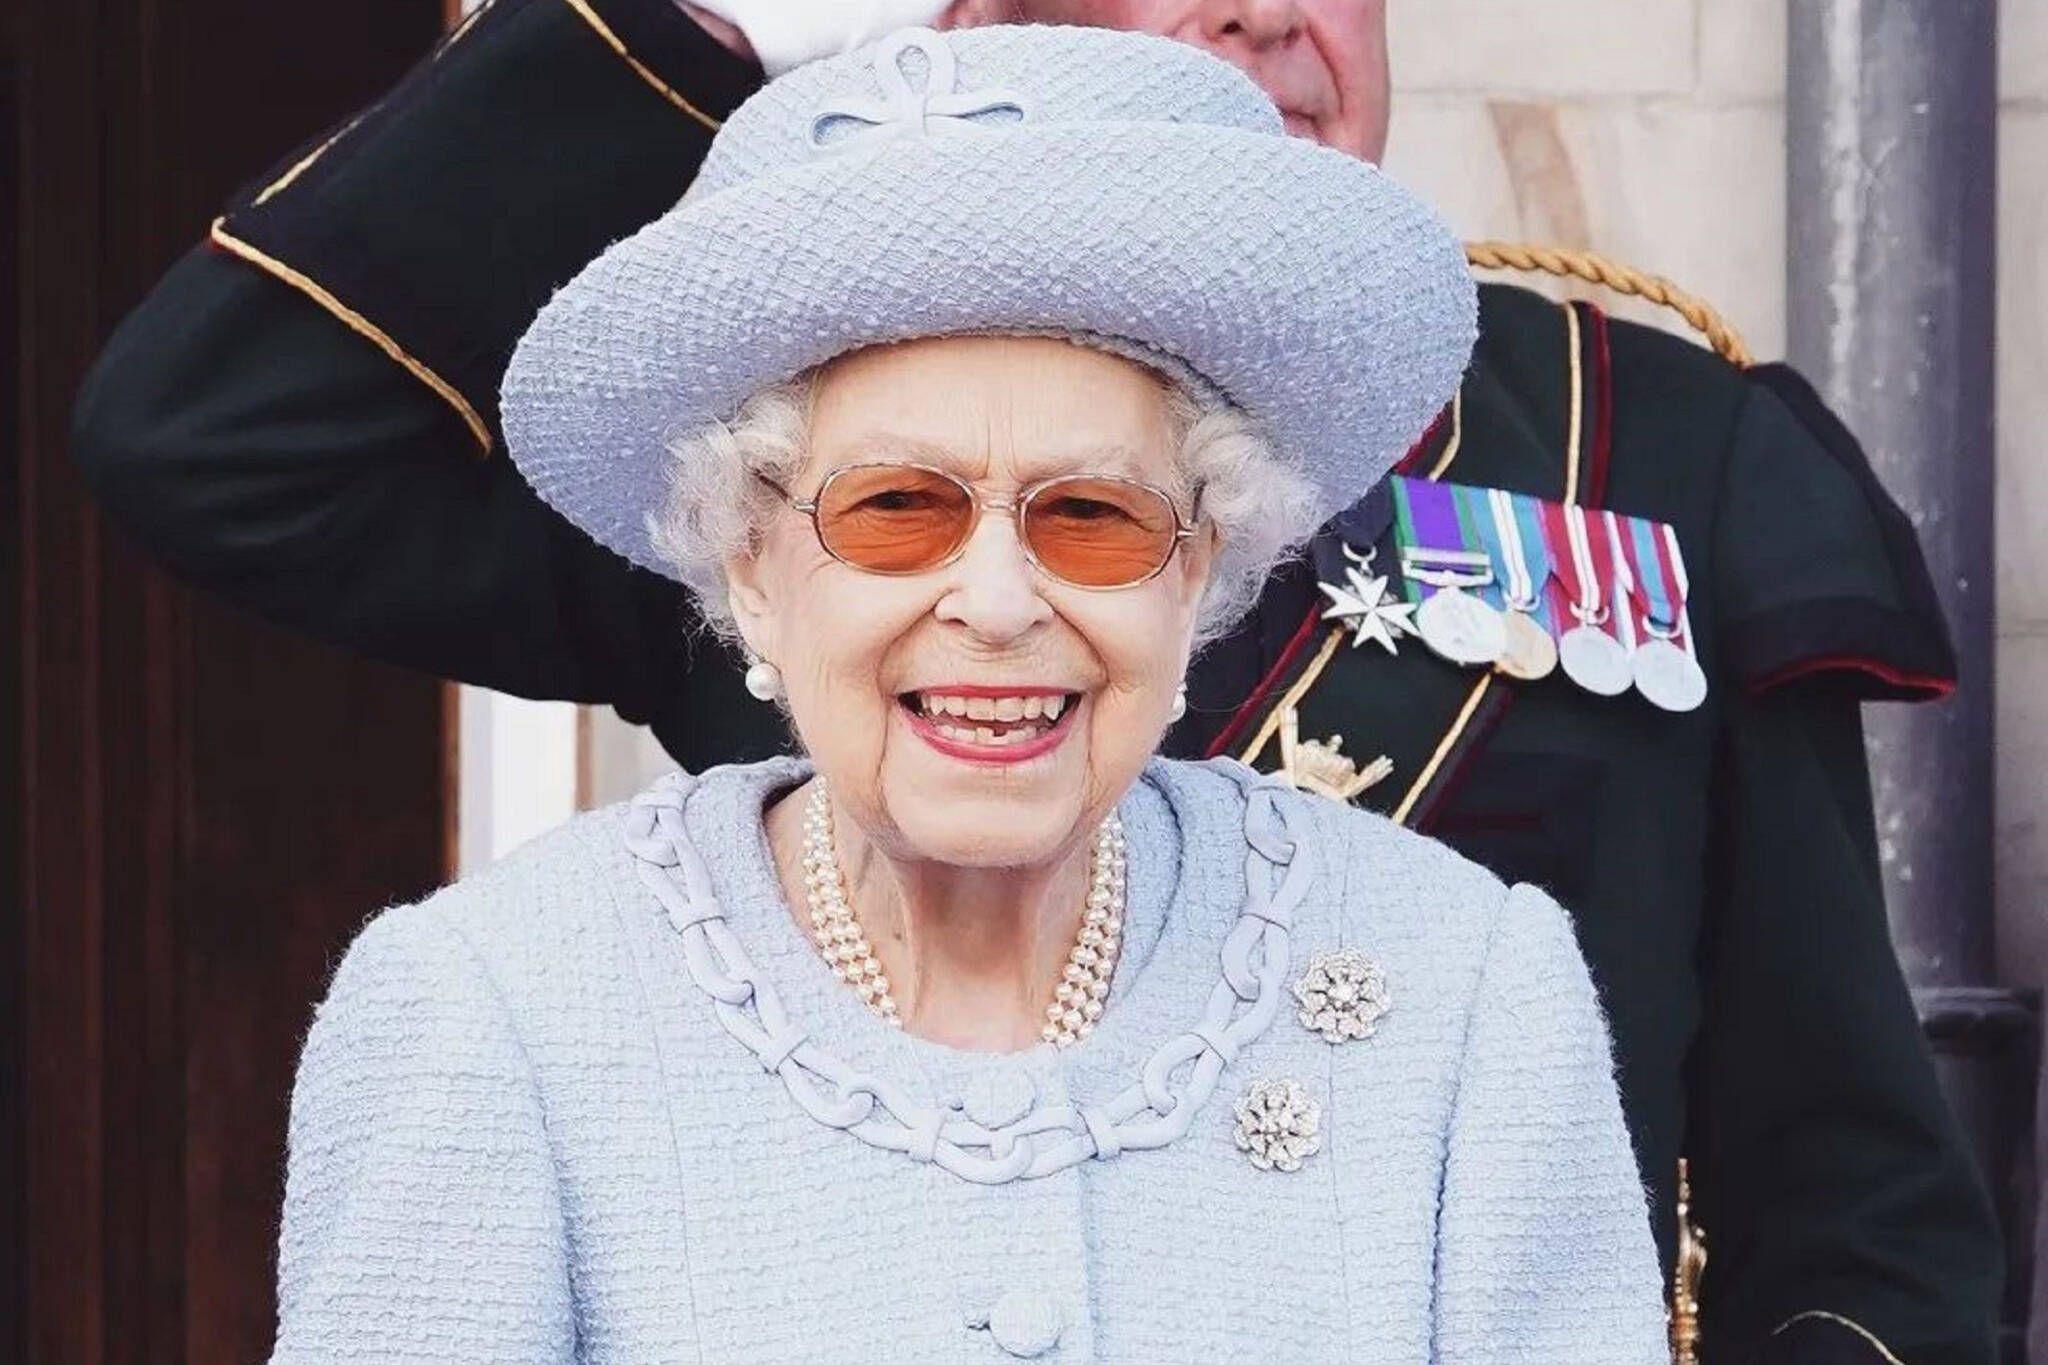 Canada might be getting a national holiday to mourn Queen Elizabeth II